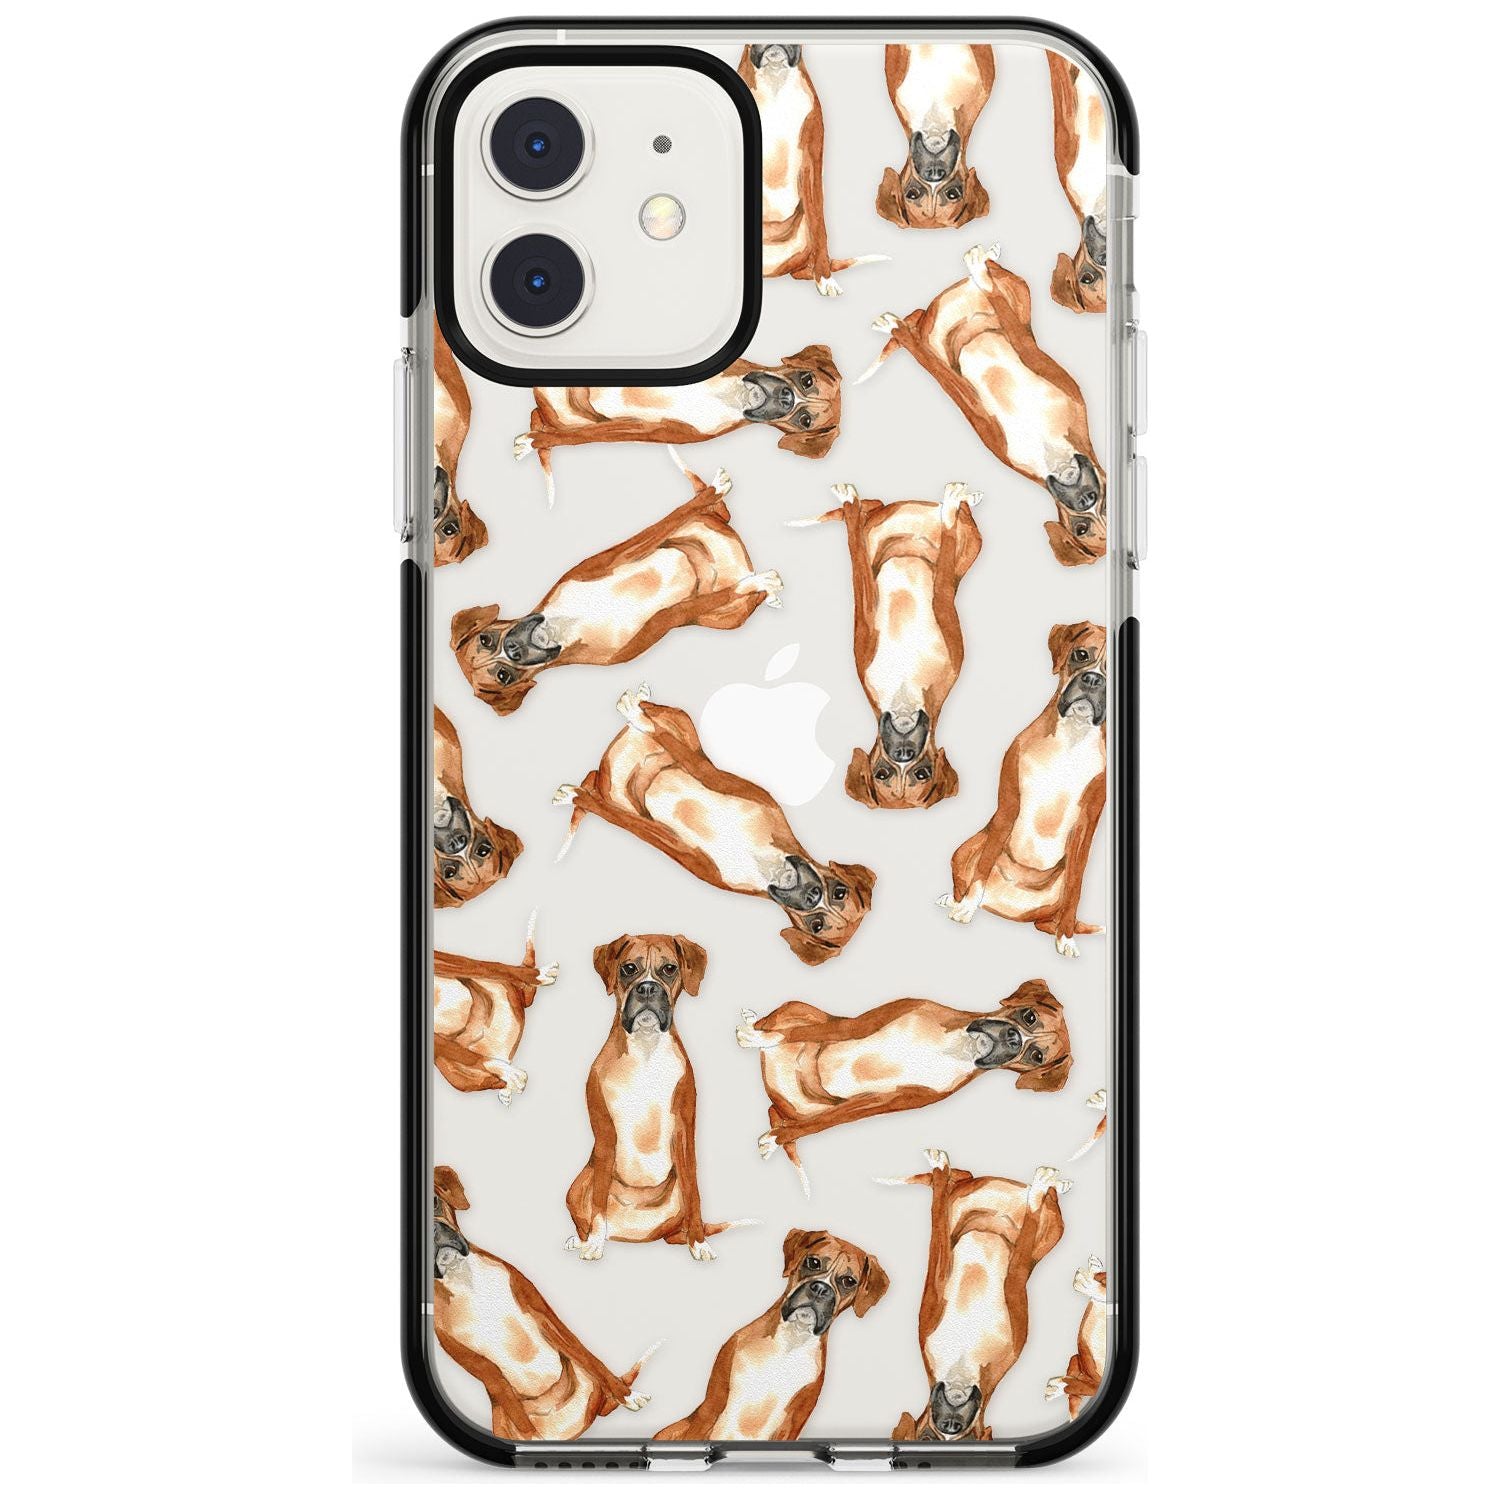 Boxer Watercolour Dog Pattern Black Impact Phone Case for iPhone 11